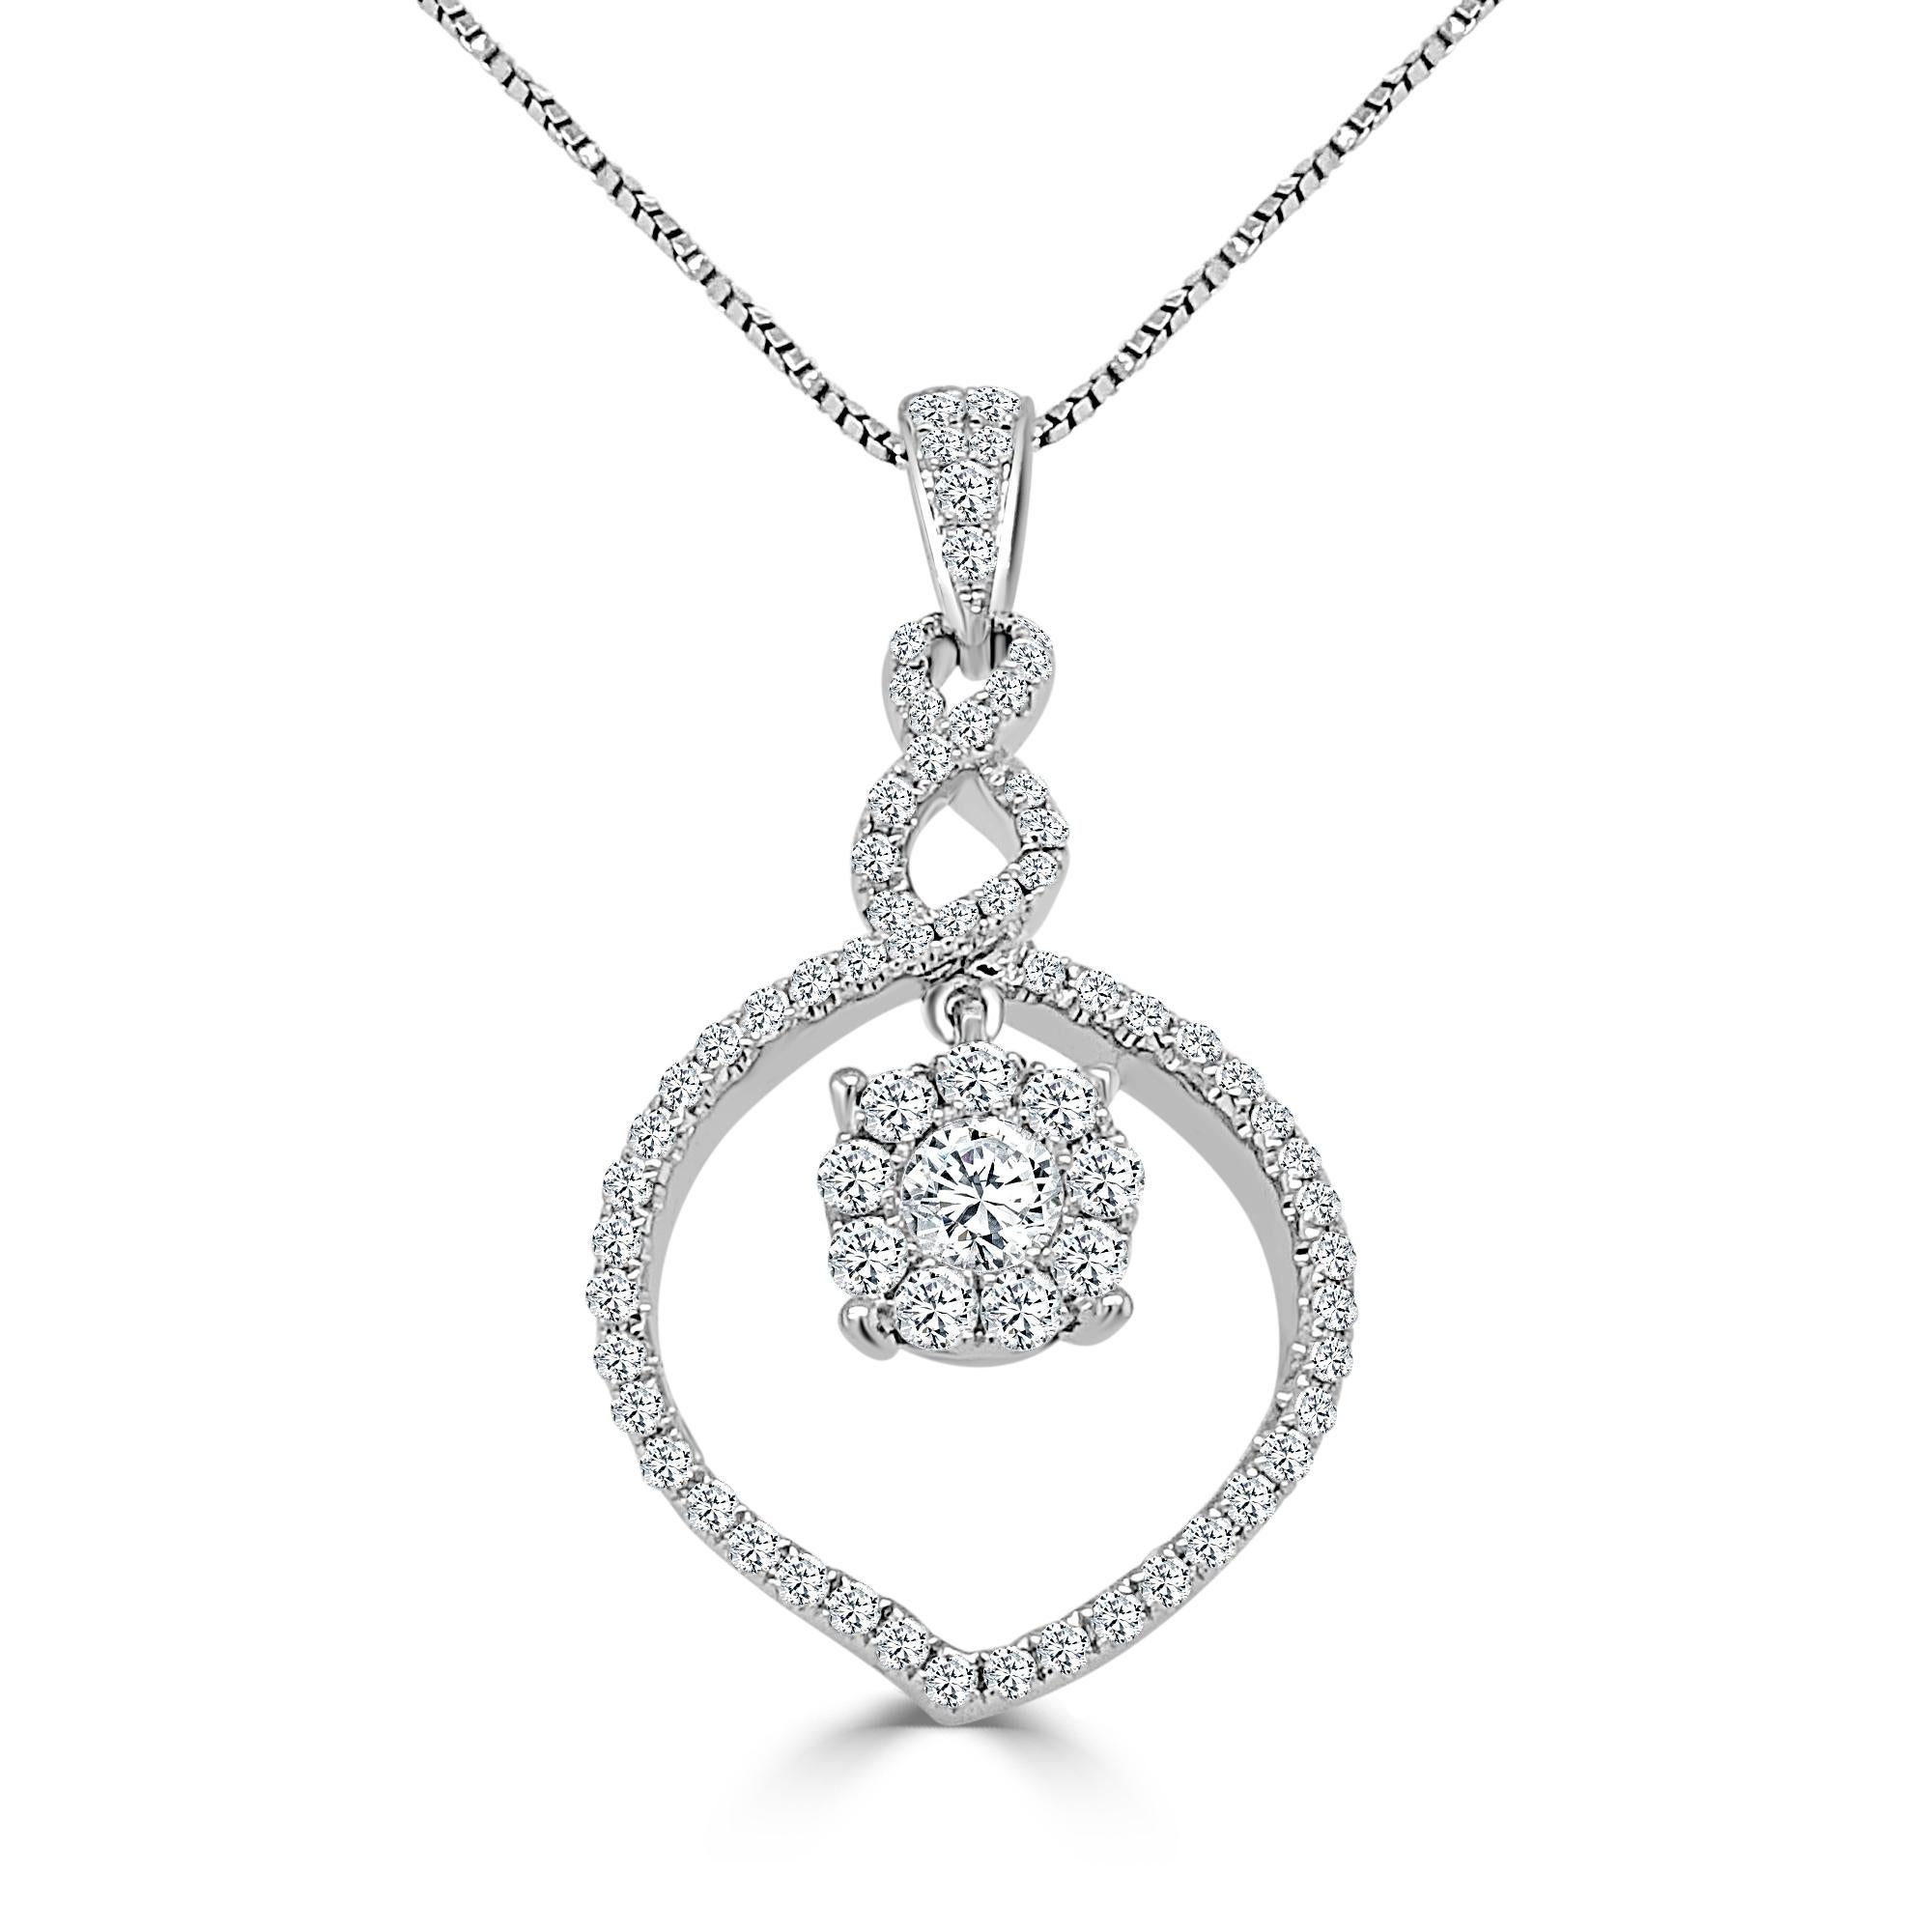 18 Karat White Gold 0.61 Carat Diamond Chain Necklace Wedding Fine Jewelry 

Gentle and elegant pendant is crafted in a sleek white gold. Featuring round cut diamonds, together totaling 0.61 TCW. Suspended from a 16-inch stunning non-tangle, non